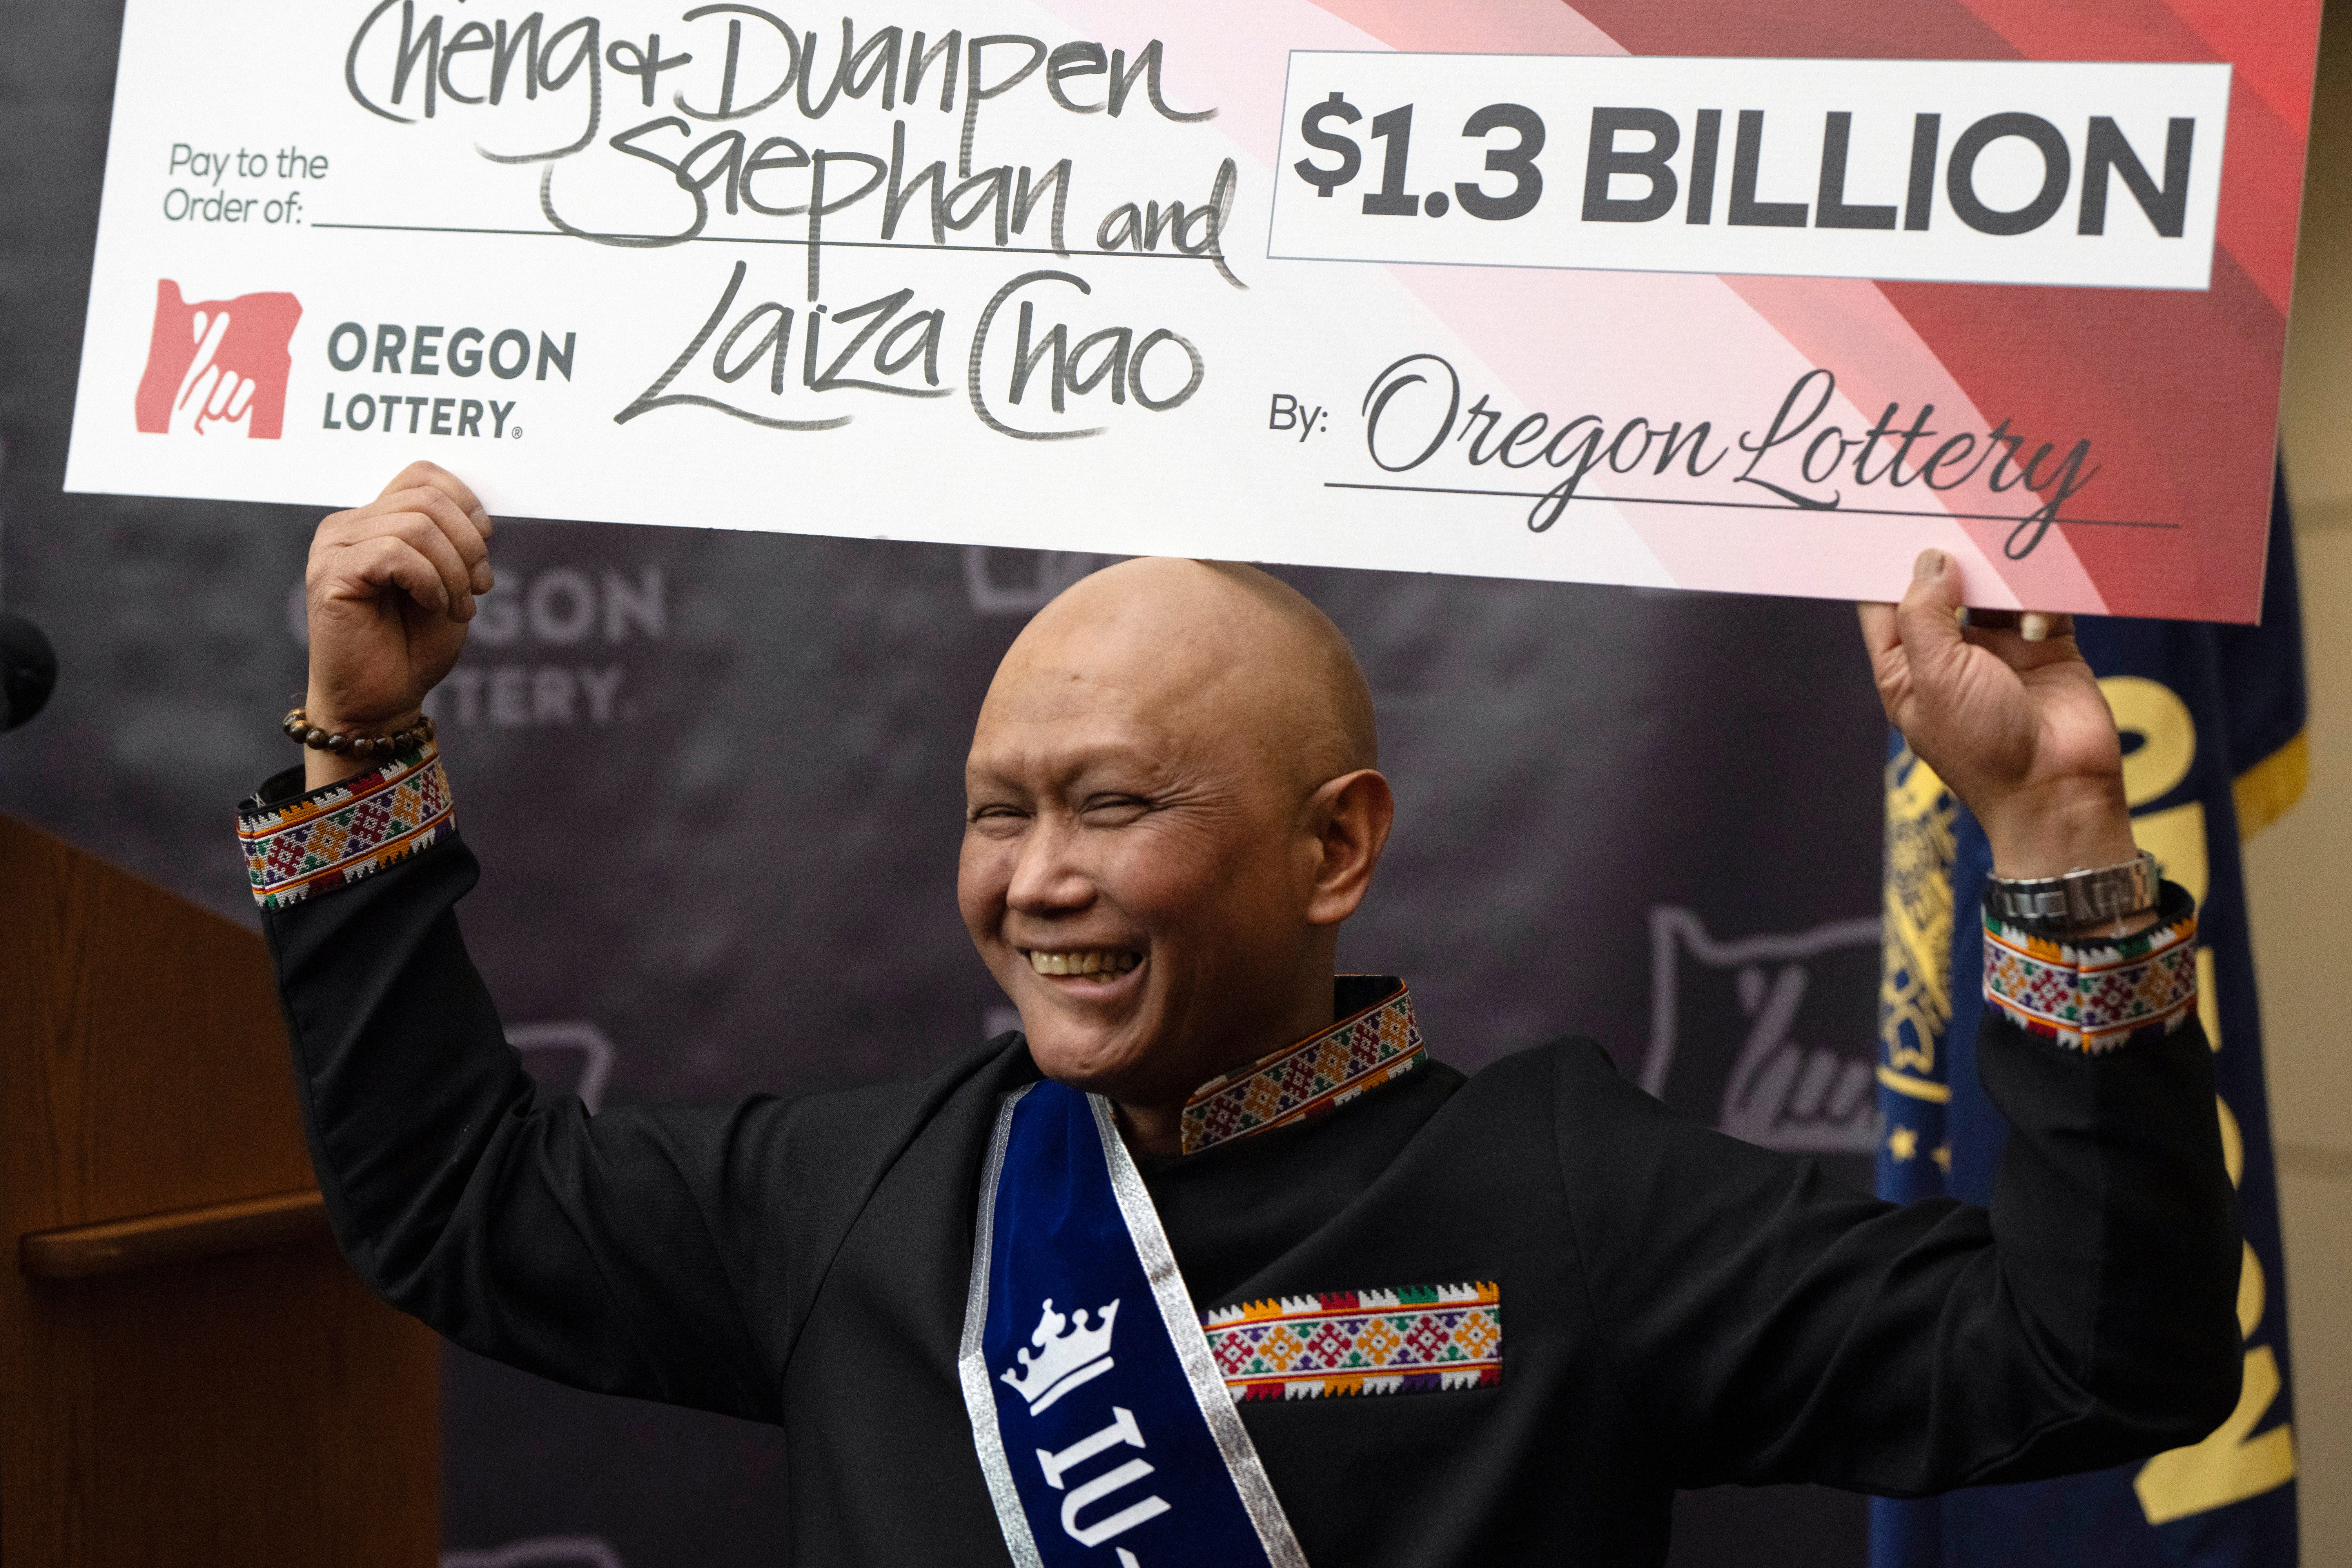 Powerball winner Cheng ‘Charlie’ Saephan celebrates his win at a news conference in Oregon